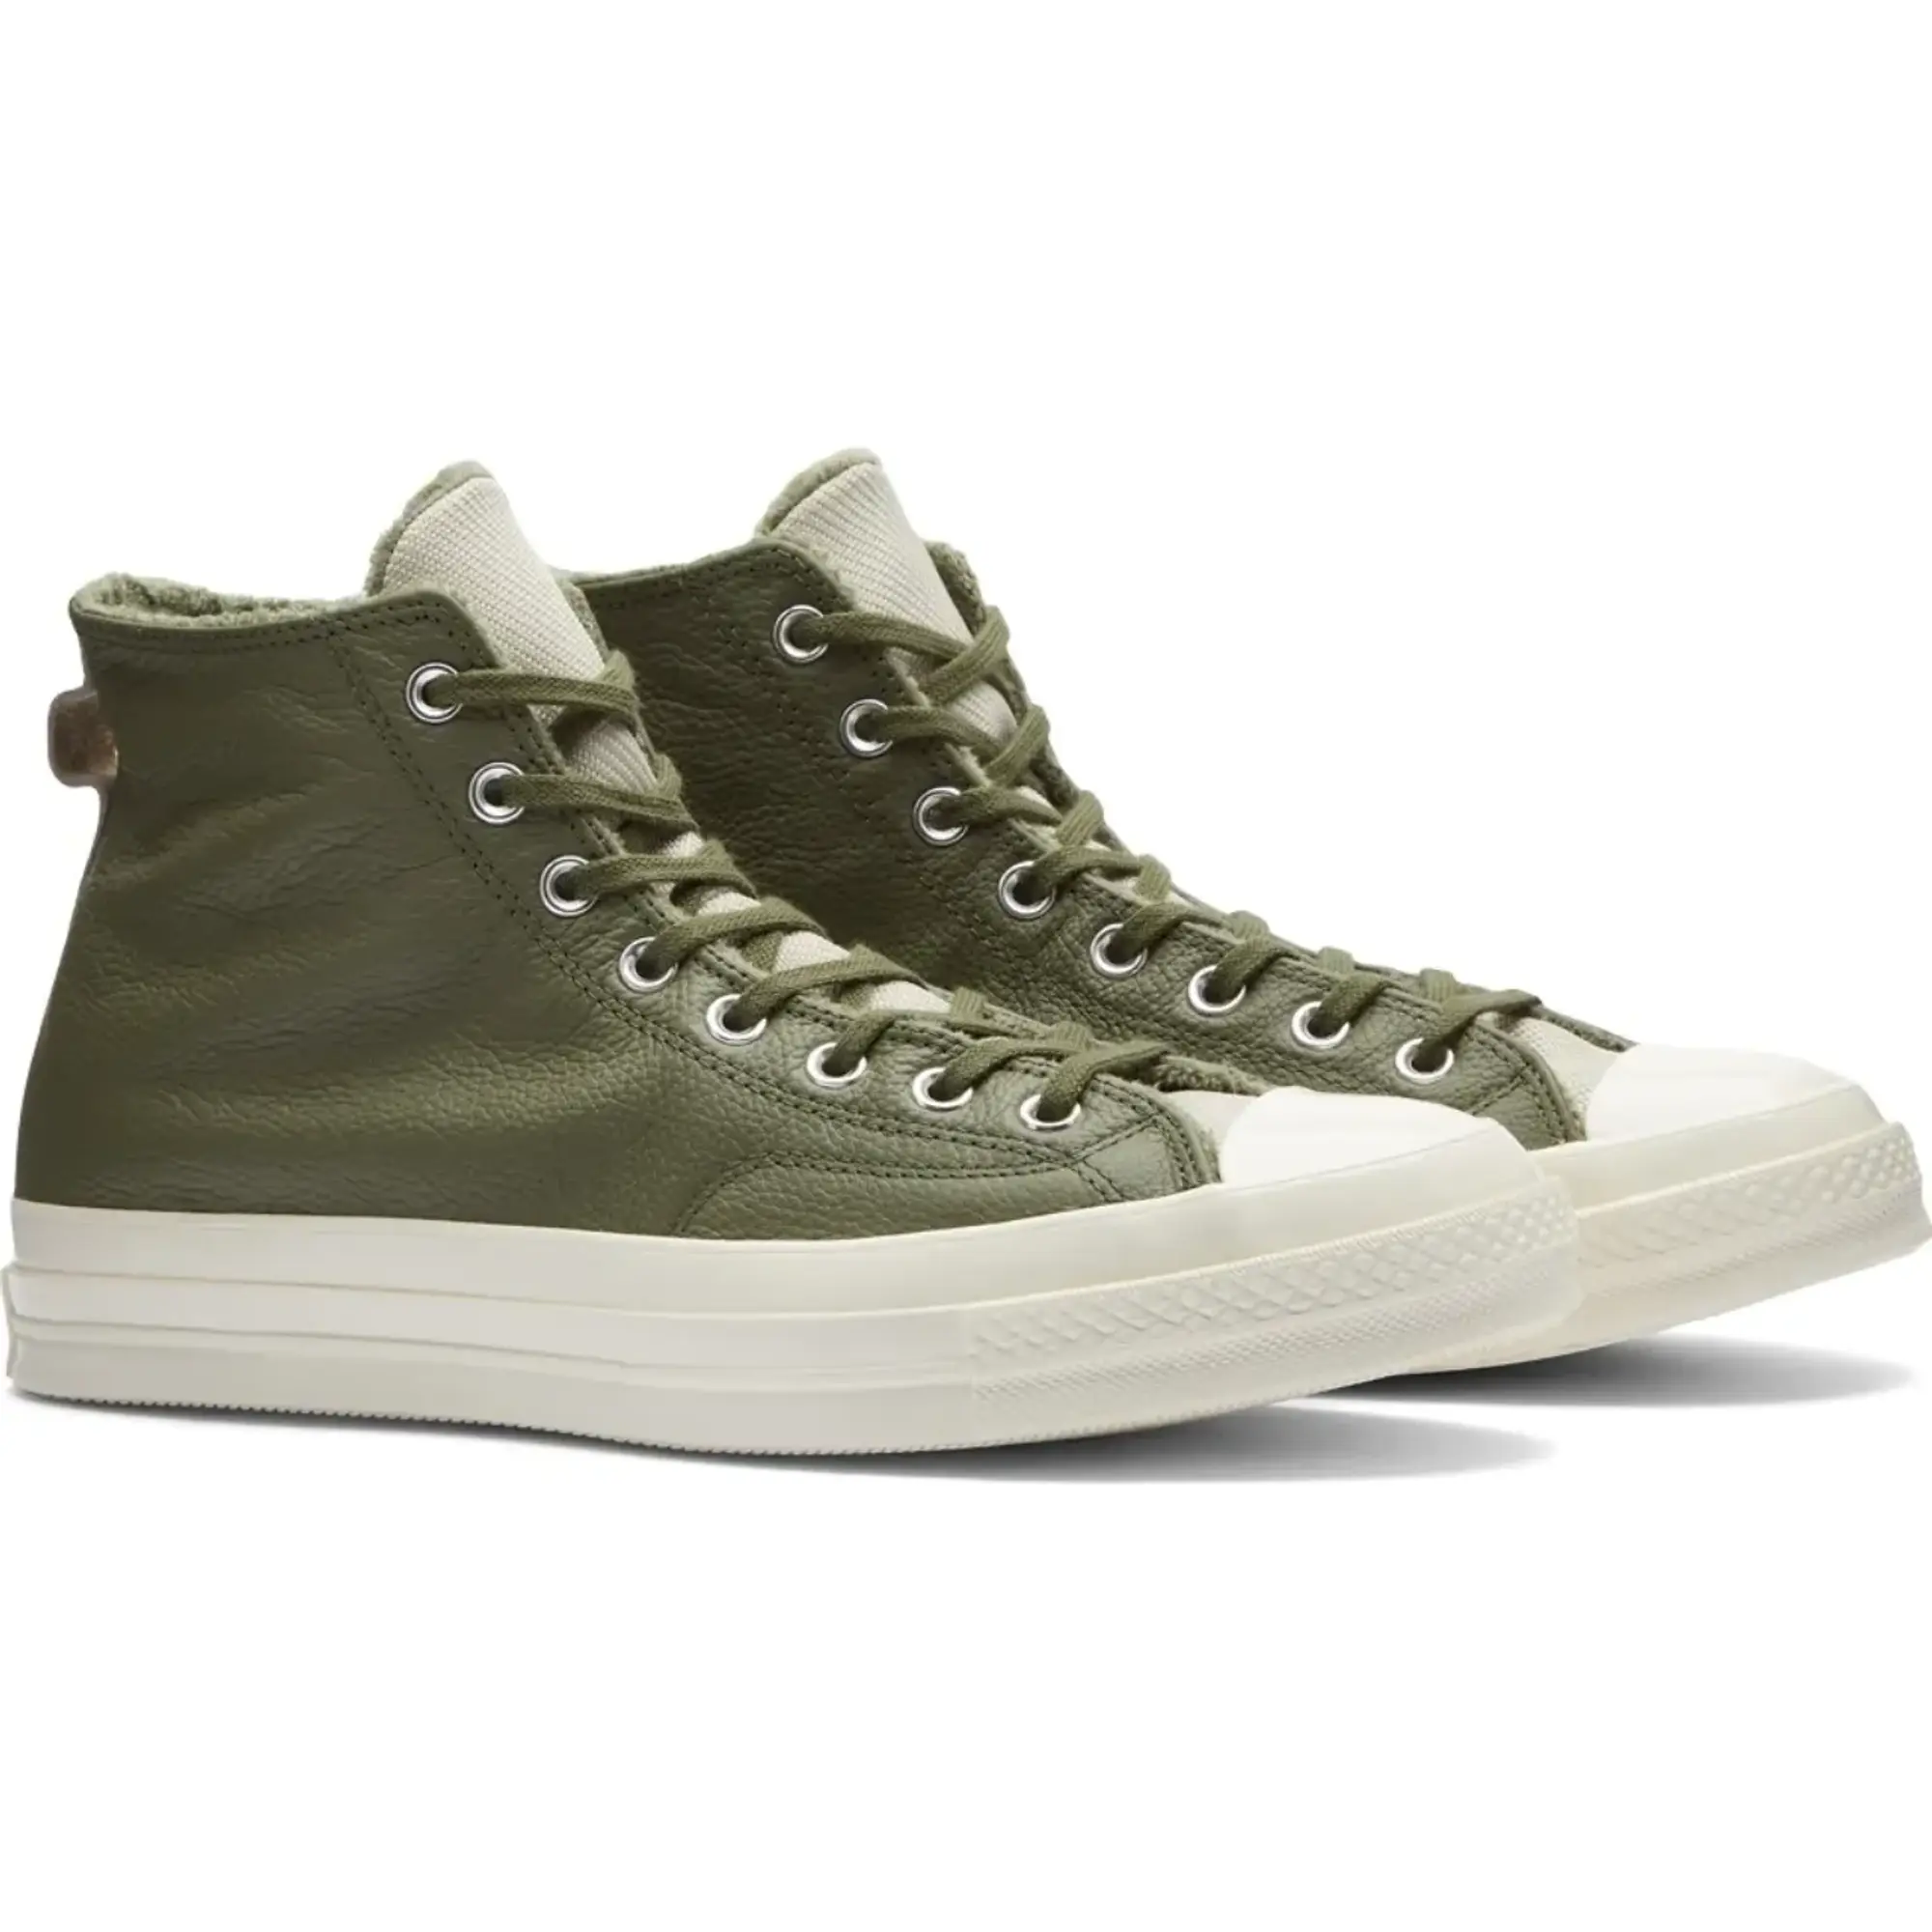 Converse chuck 70 counter climate trainers in khaki